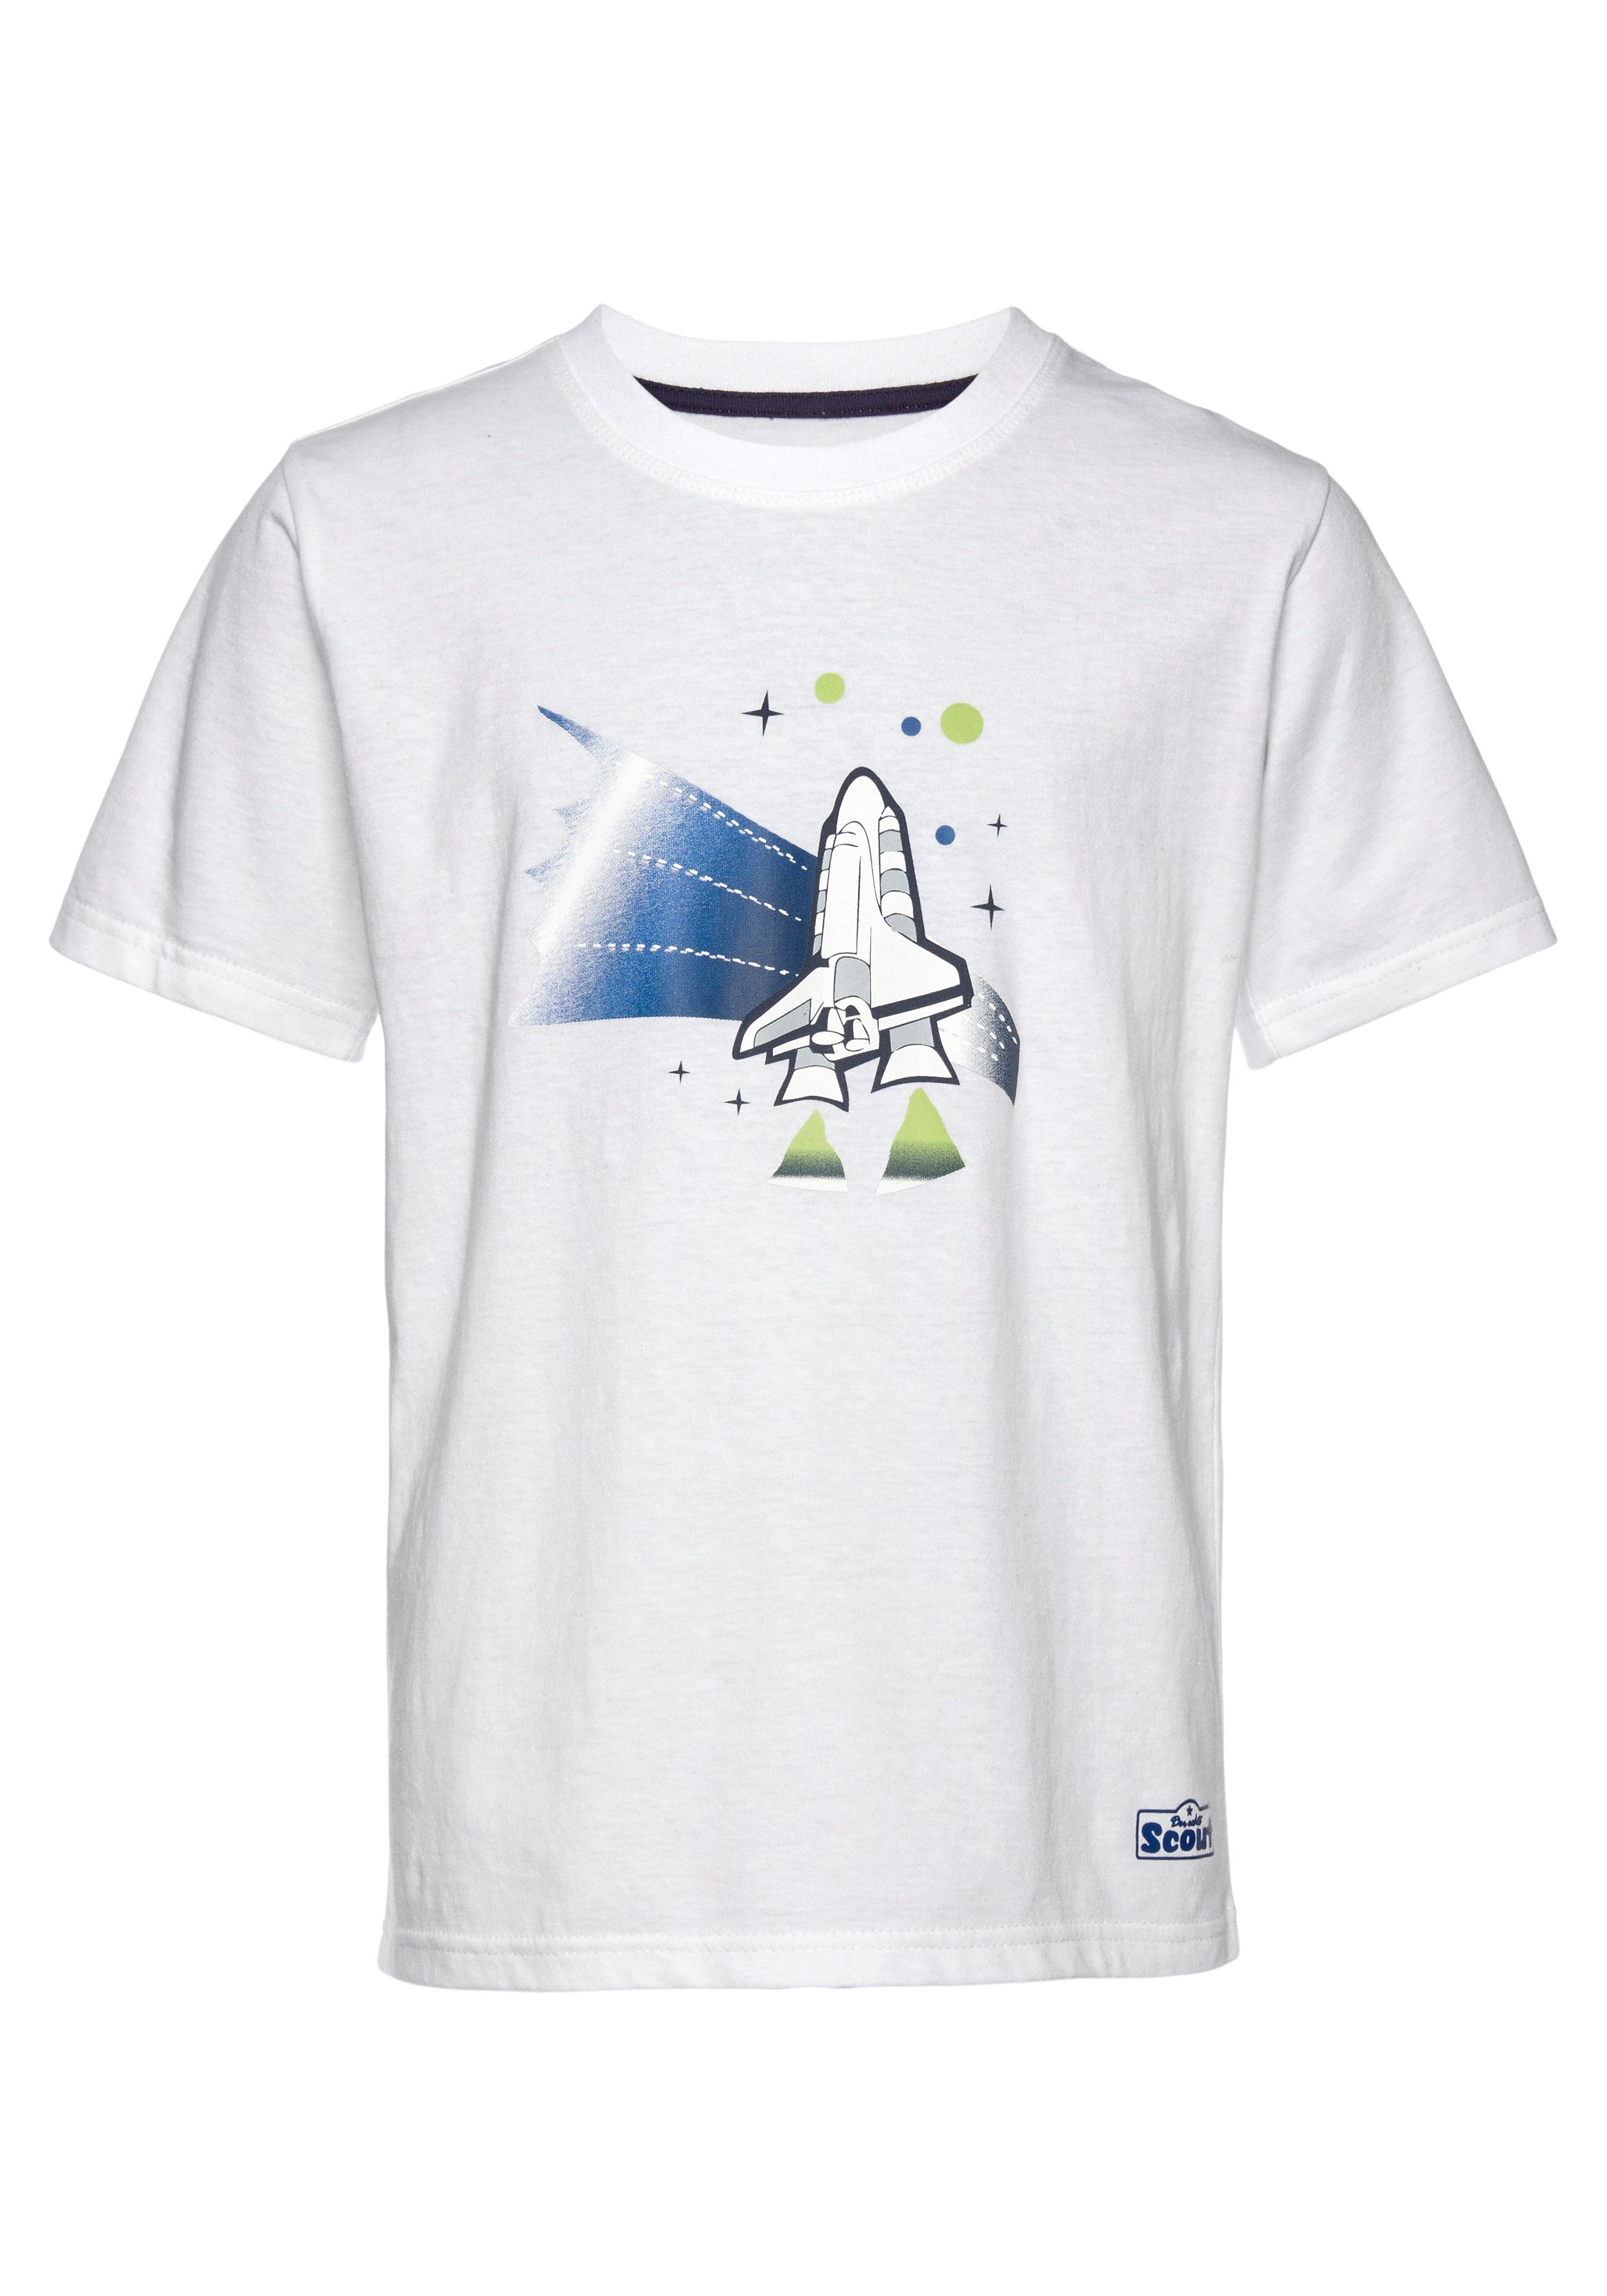 (Packung, 2er-Pack) aus Scout SPACE Bio-Baumwolle T-Shirt